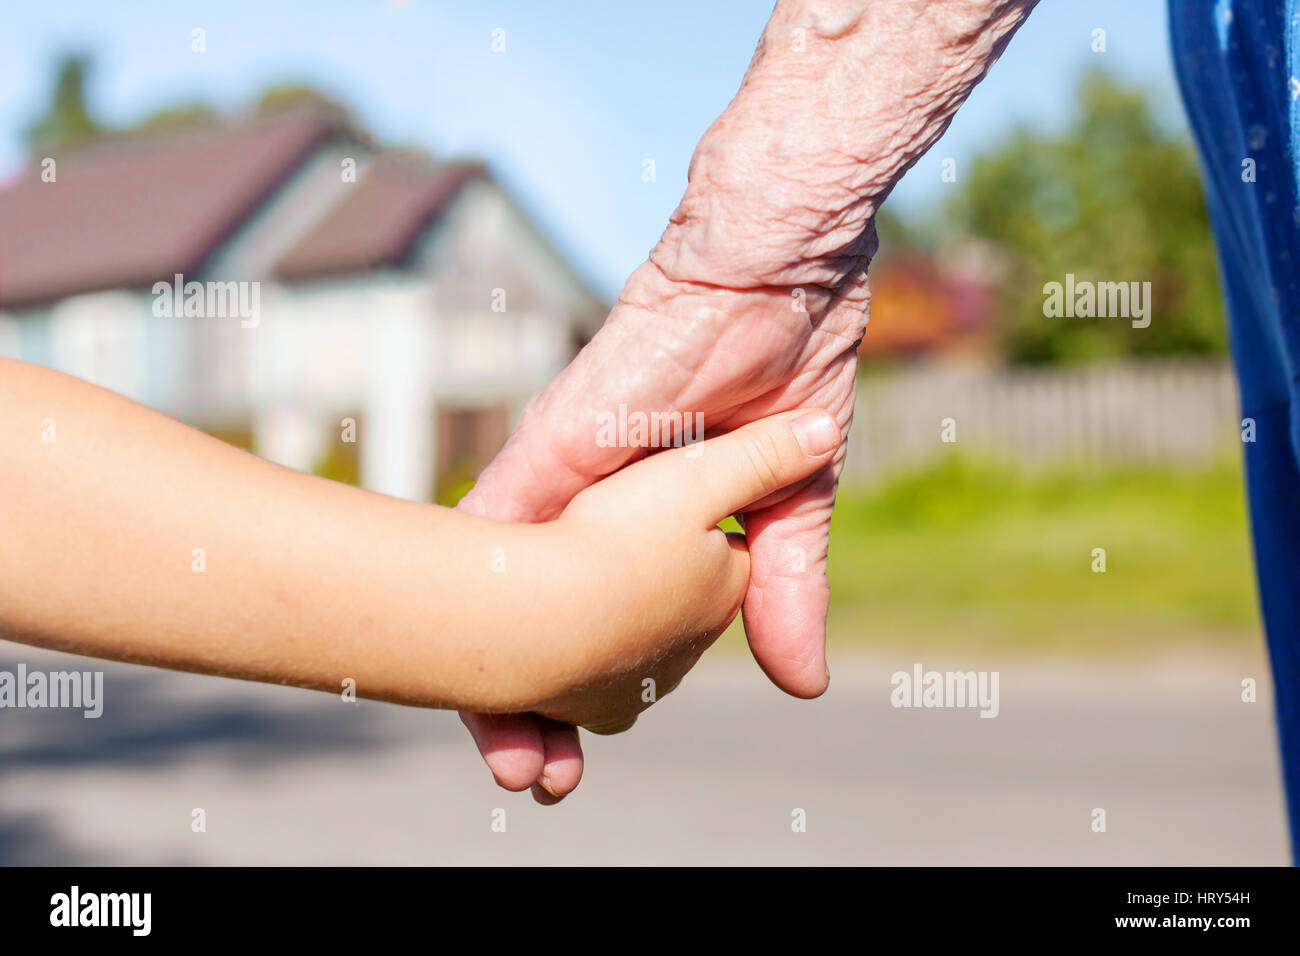 grandmother taking hand of young child, concept Stock Photo